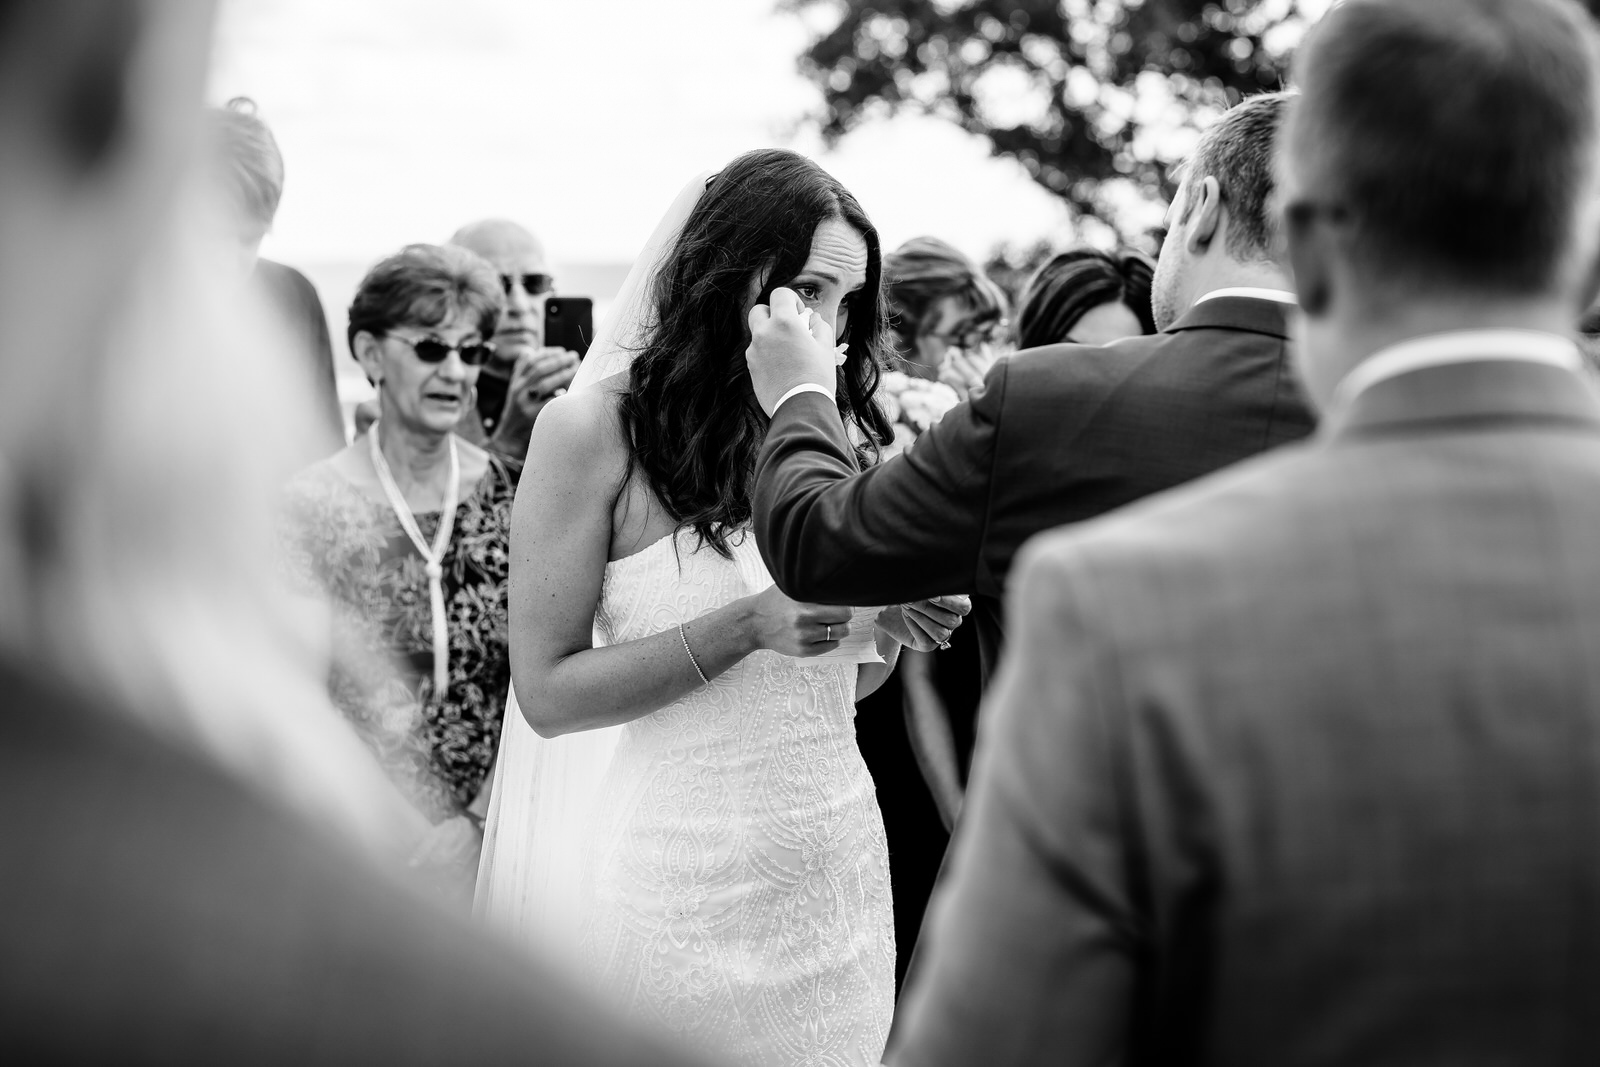 A bride wipes her eyes during her wedding ceremony.